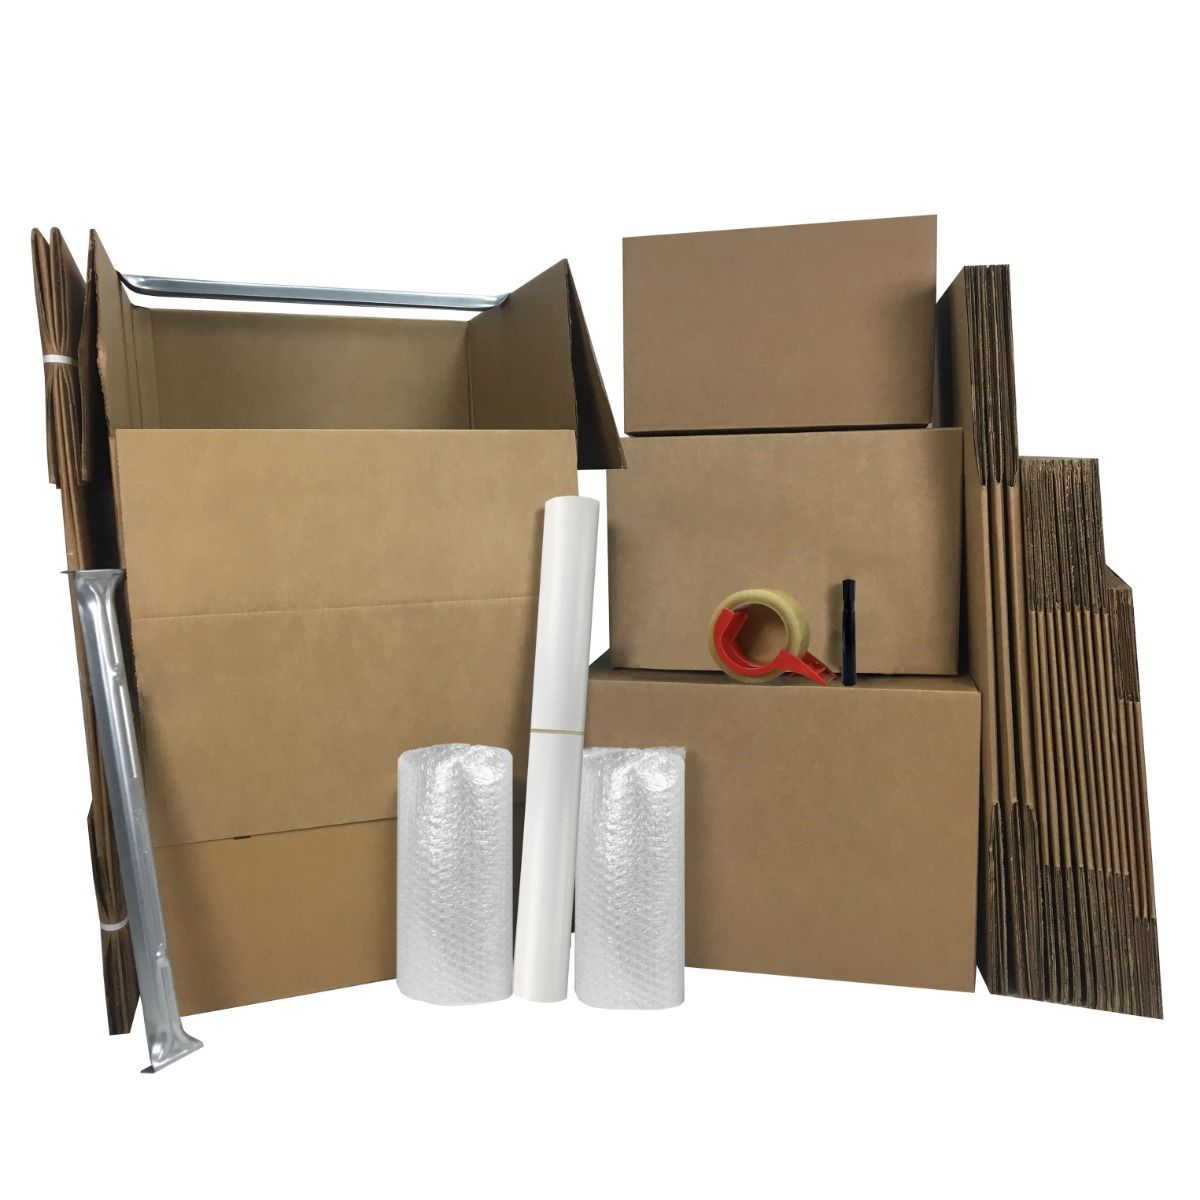  UBOXES Moving Boxes - 2 Room Bigger Smart Moving Kit - 28  Boxes,Tape, more : Box Mailers : Office Products